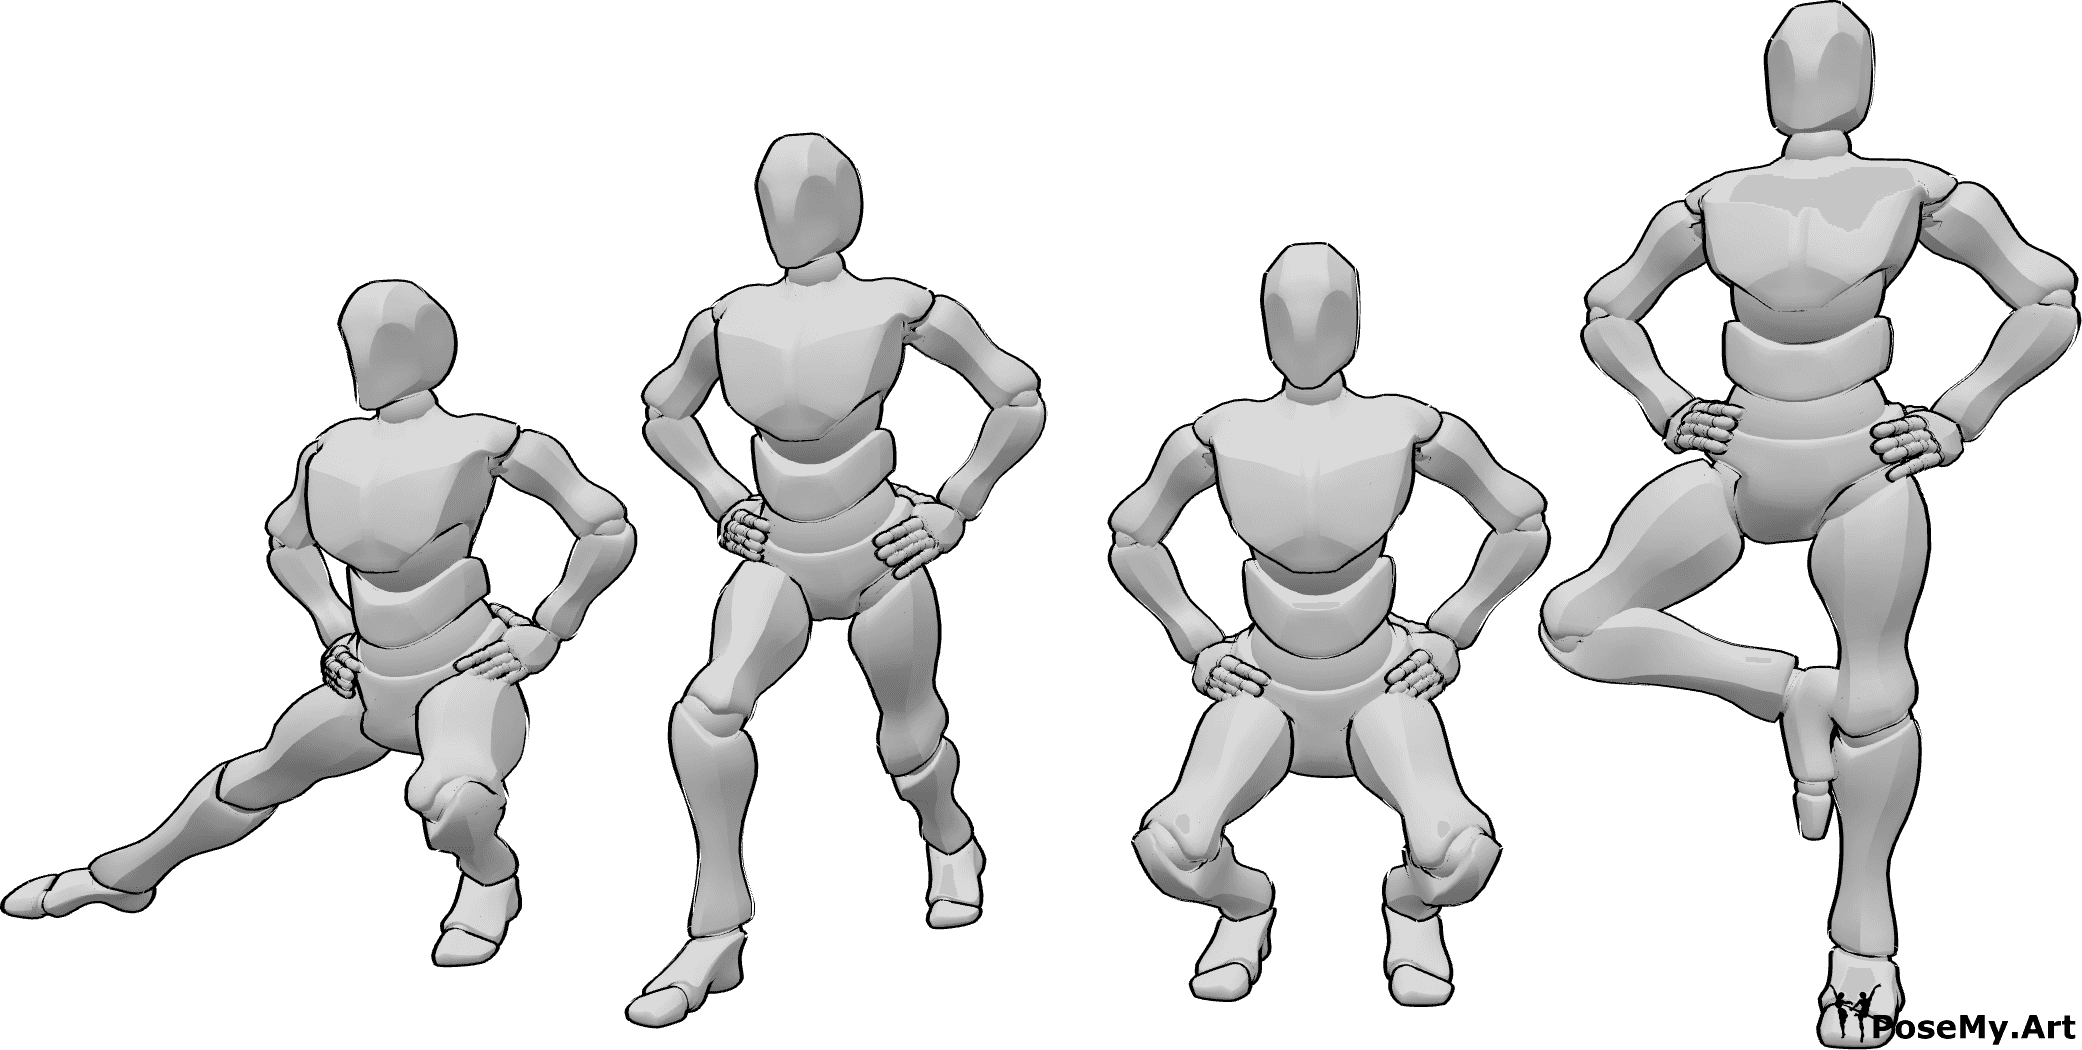 Pose Reference - Exercises hands hips pose - Four males are doing exercises with hands on hips